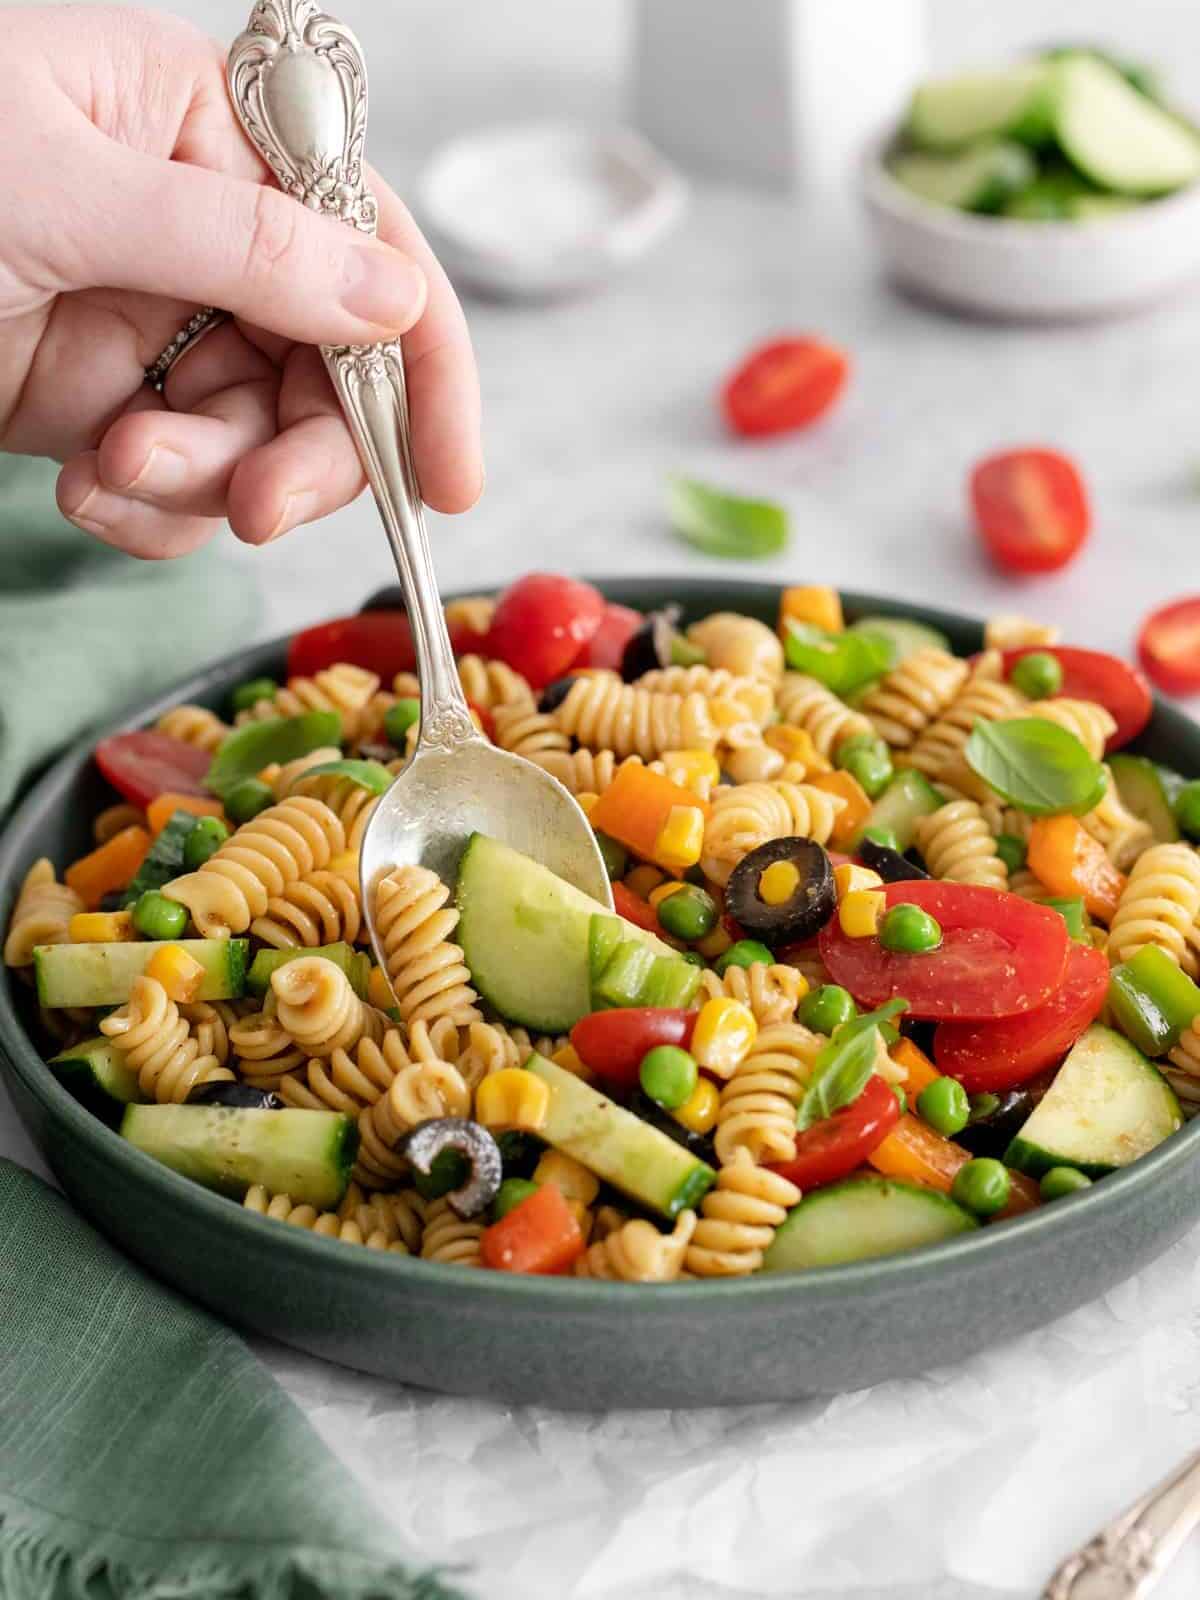 three-quarters view of a hand scooping veggie rainbow pasta salad from a gray bowl with a spoon.